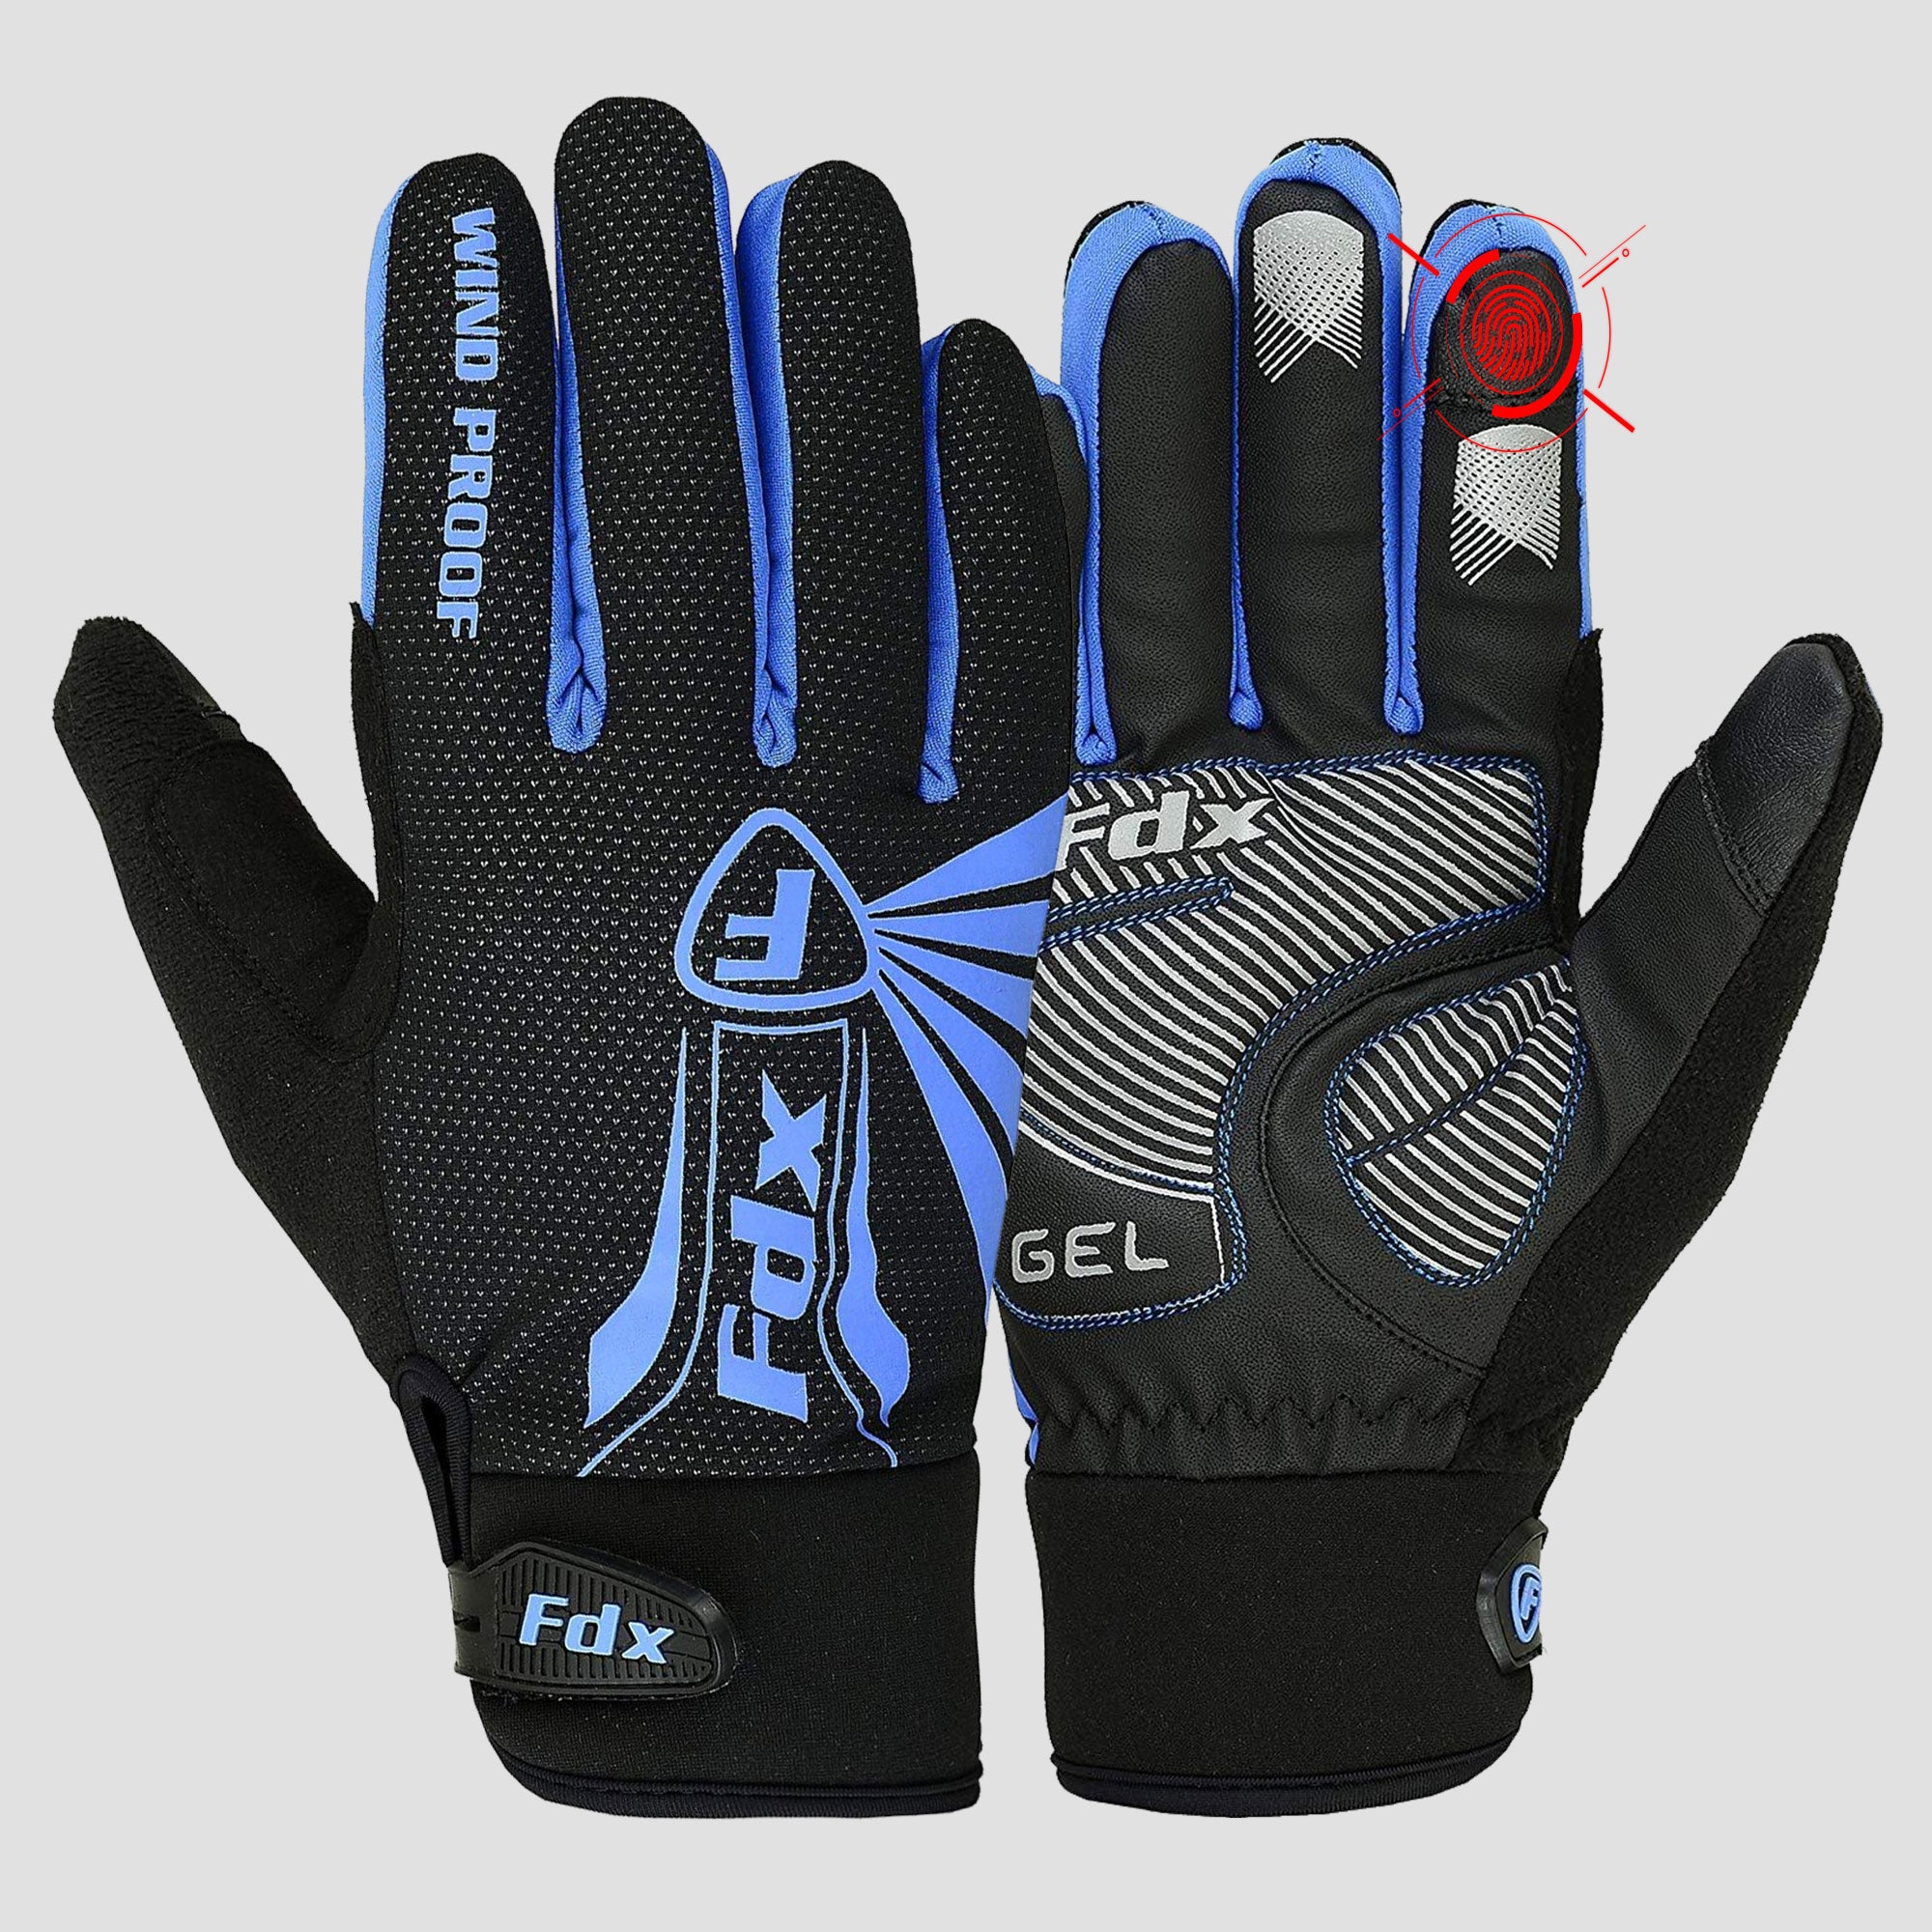 Fdx Black & Blue Full Finger Cycling Gloves for Winter MTB Road Bike Reflective Thermal & Touch Screen - Zesto